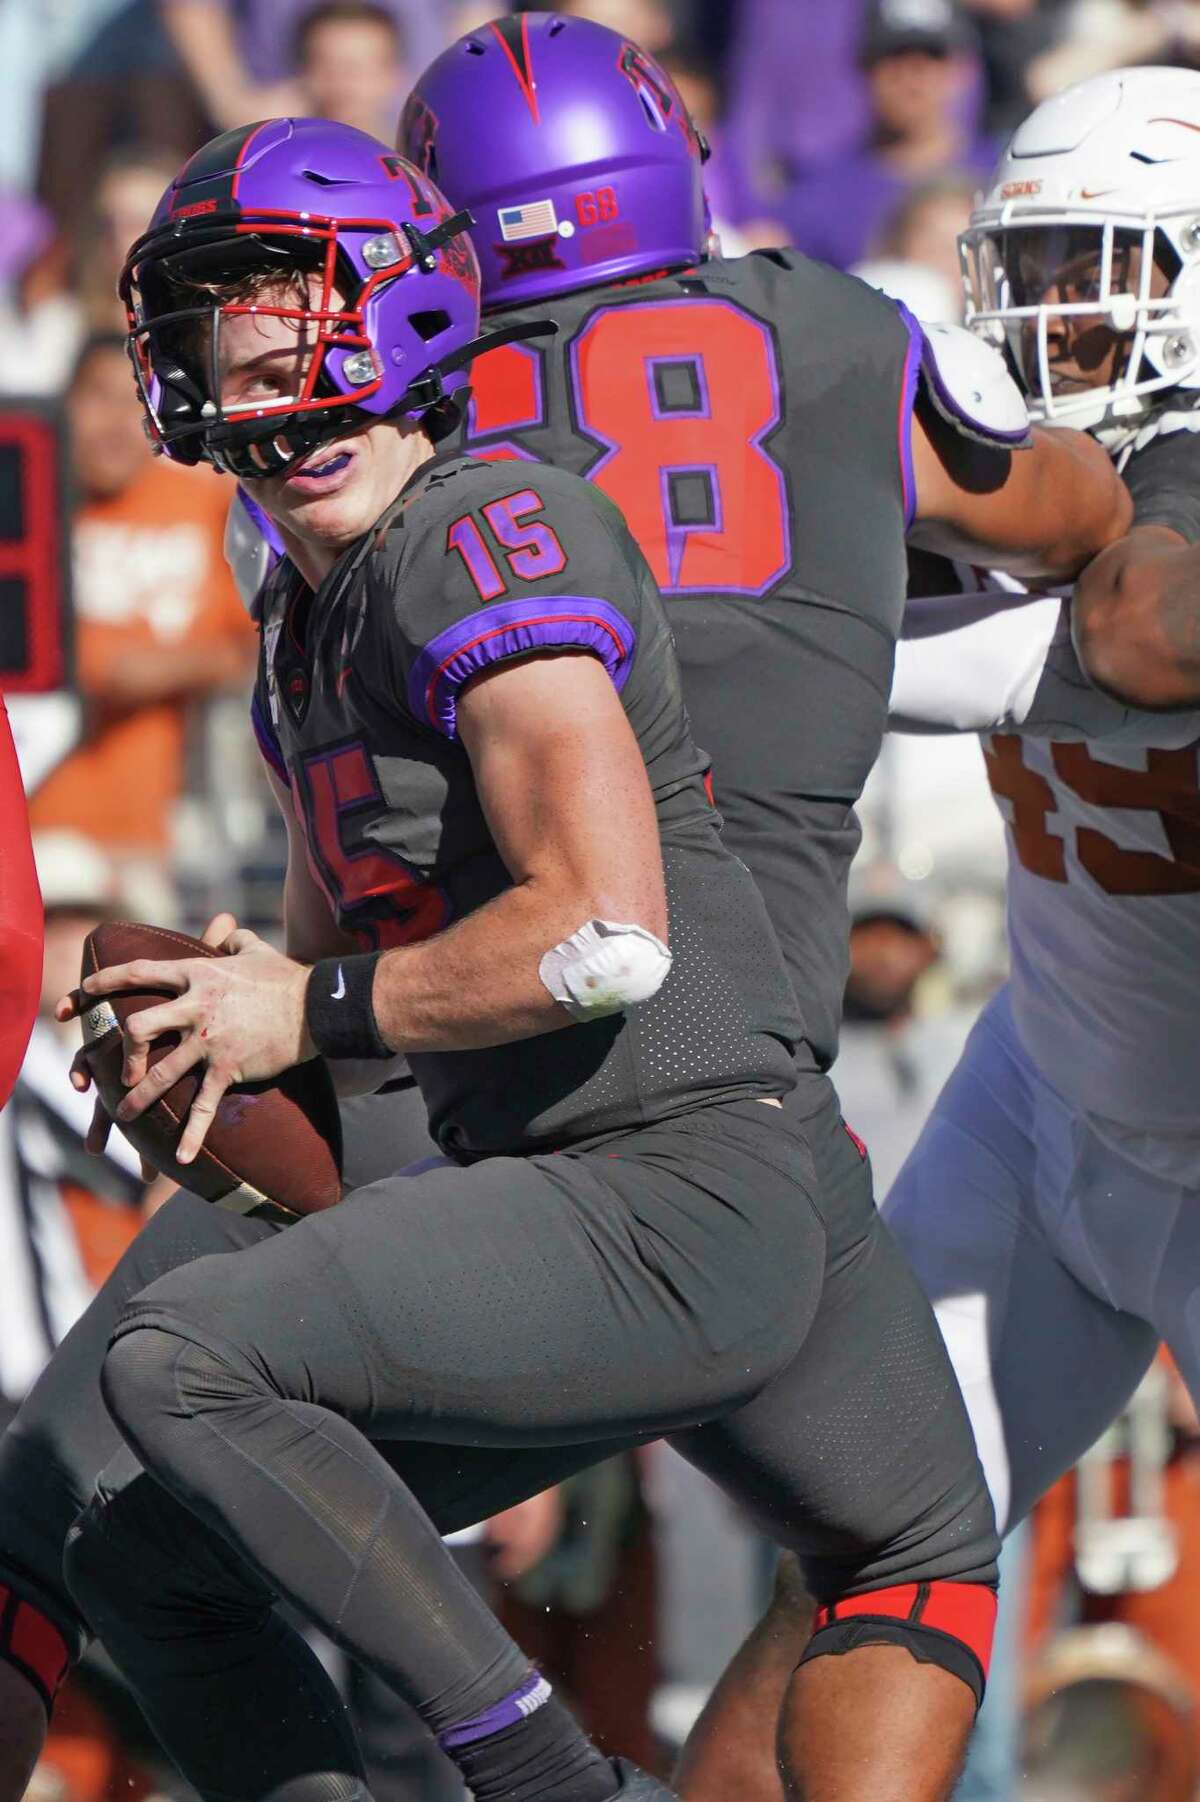 TCU quarterback Max Duggan (15) scrambles out of the pocket in the first half of an NCAA college football game against Texas in Fort Worth, Texas, Saturday, Oct. 26, 2019. (AP Photo/Louis DeLuca)